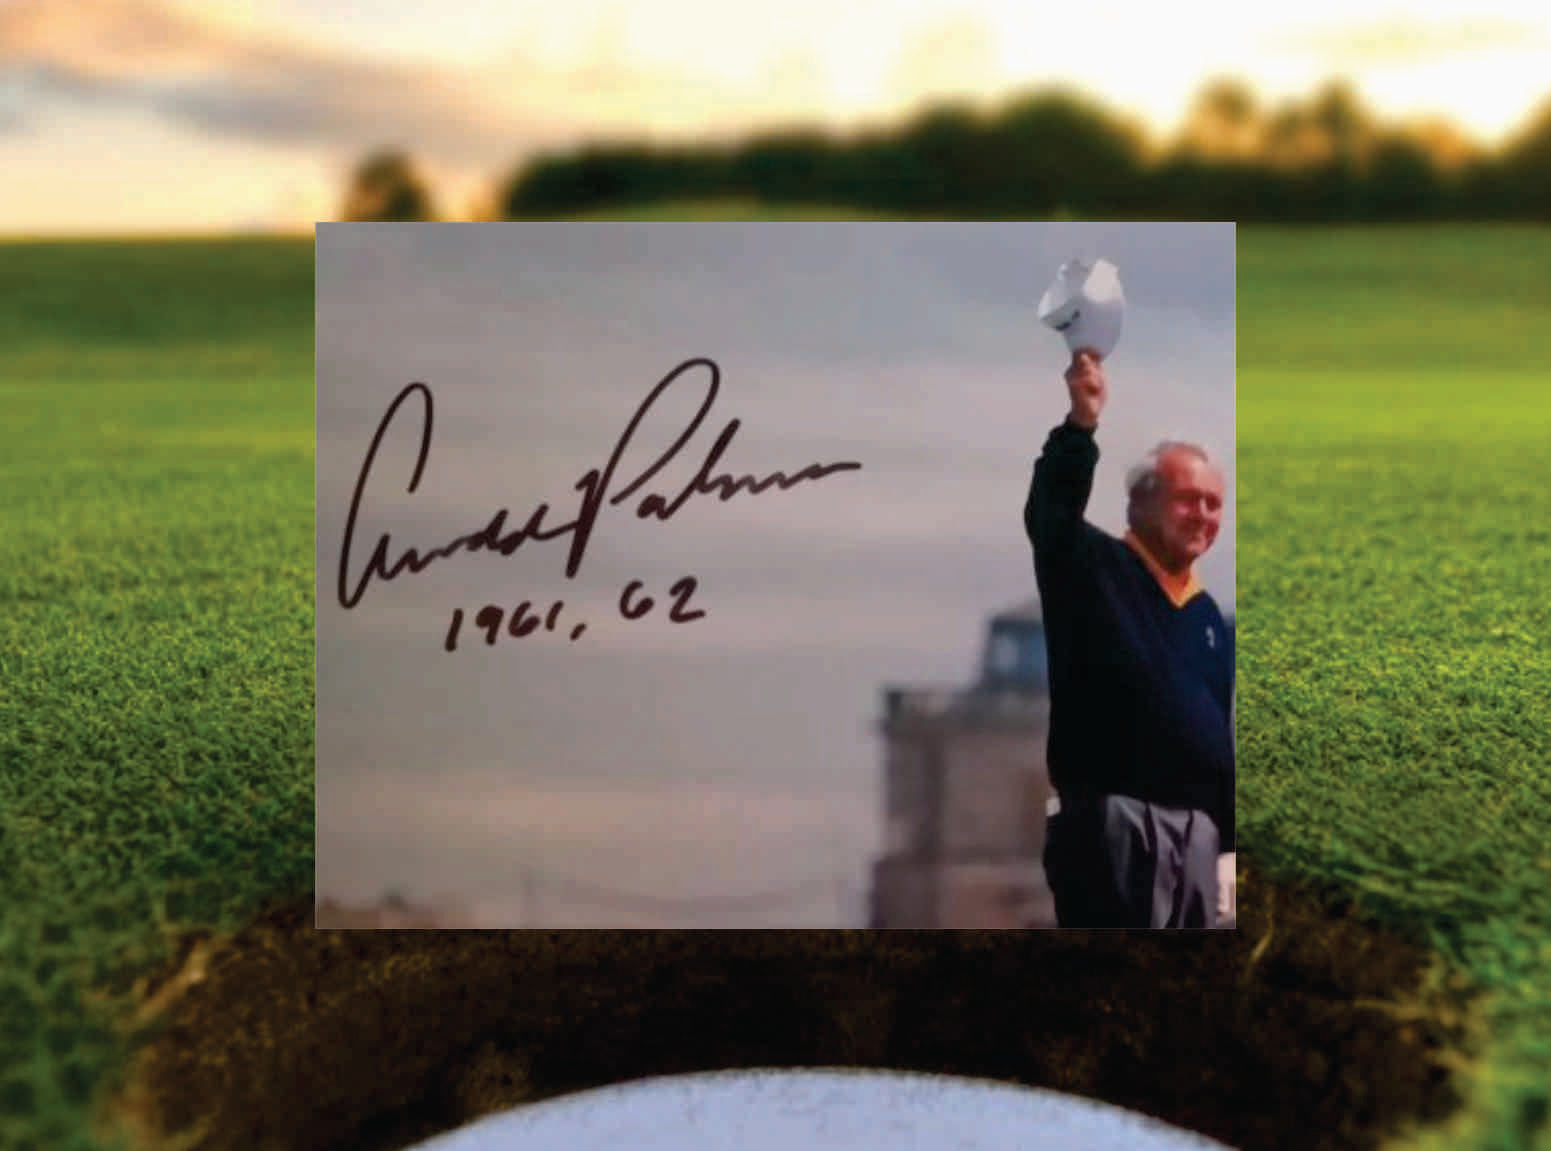 Arnold Palmer 8x10  photo signed with proof